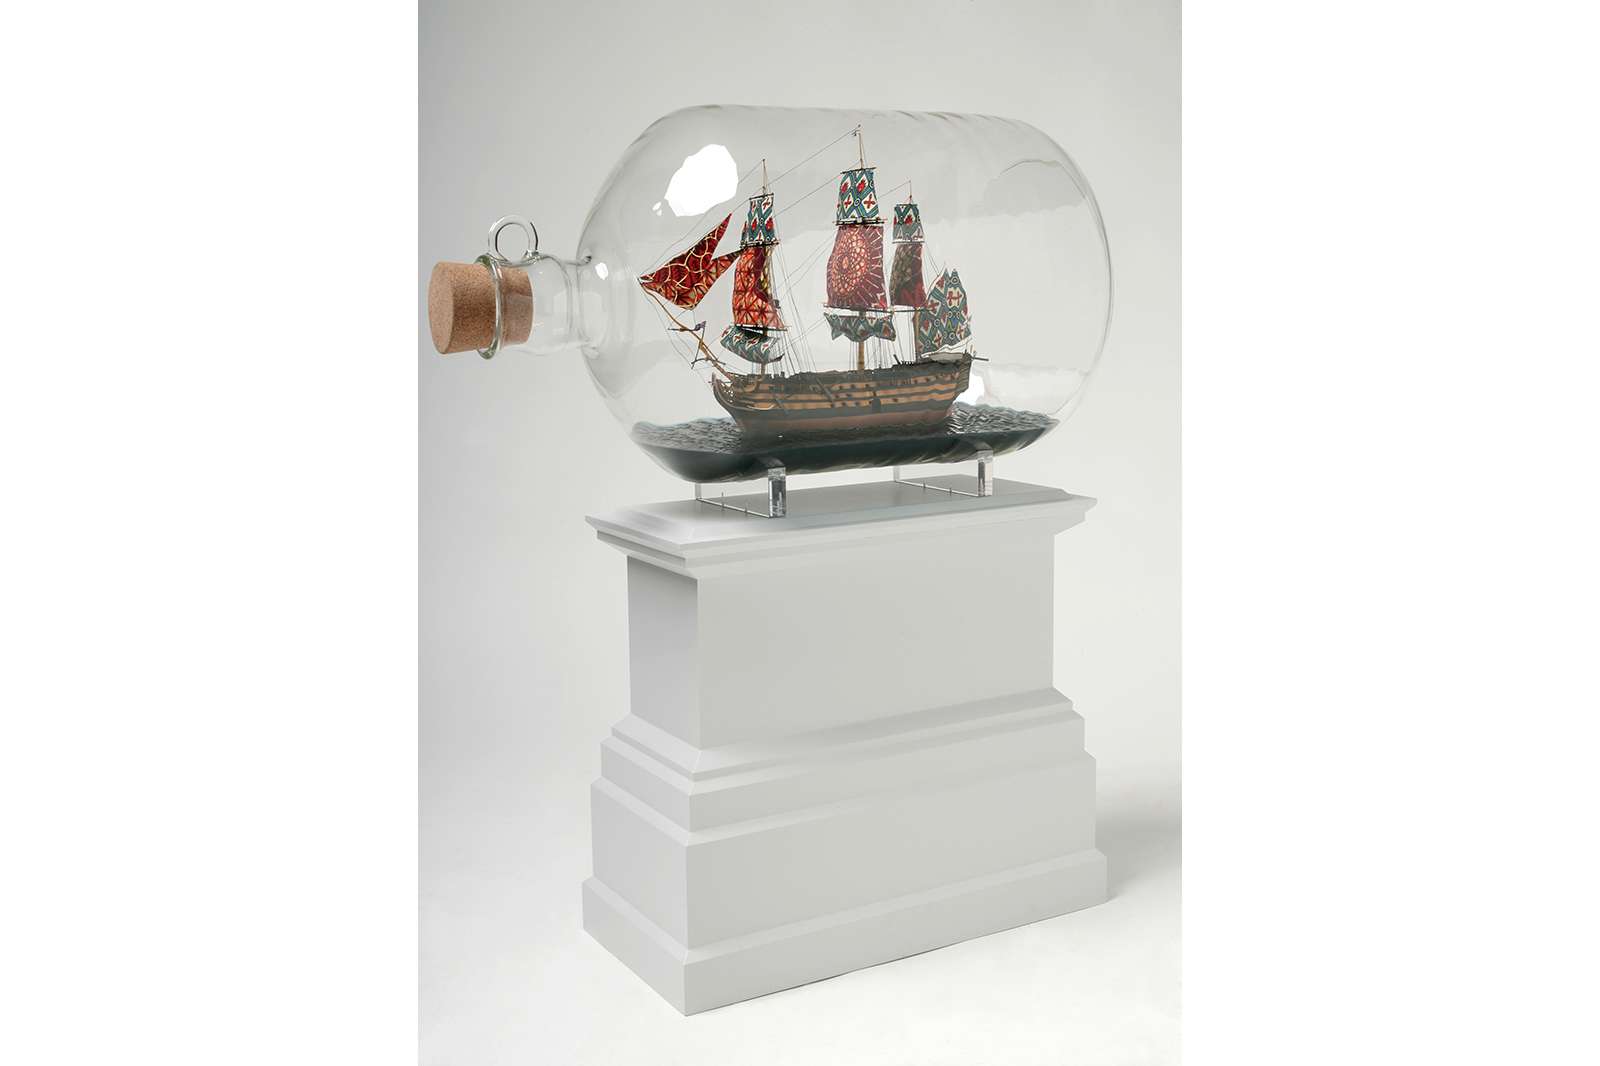 Nelson's Ship in a Bottle (maquette), 2007. Plastic, Dutch wax printed cotton textile, cork, acrylic and glass bottle. © Yinka Shonibare CBE. Courtesy James Cohan, New York.  